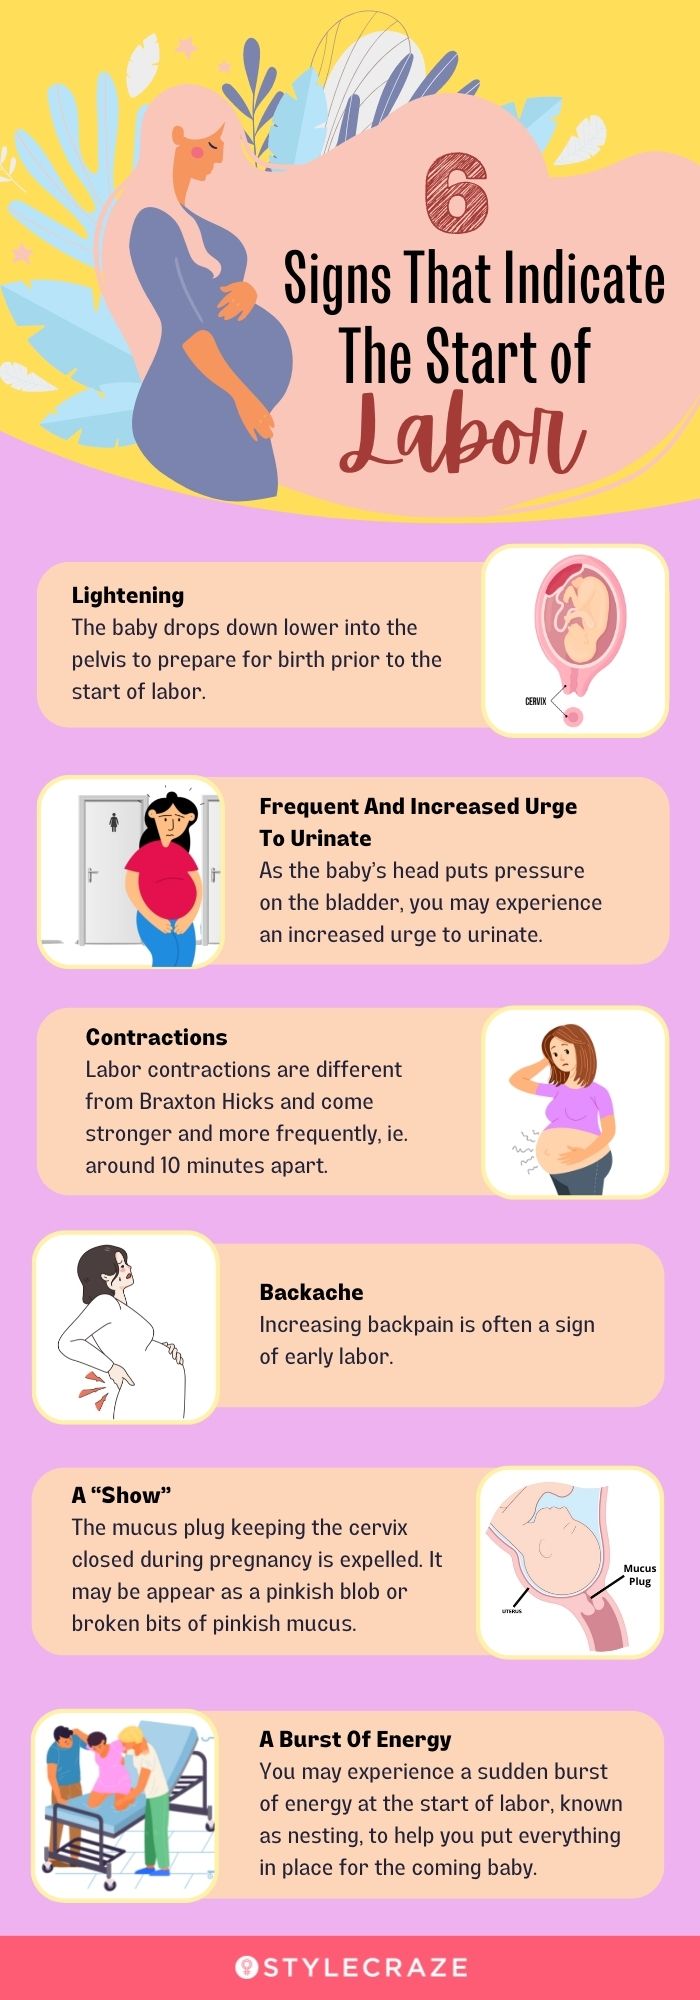 6 Signs That Indicate The Start Of Labor 